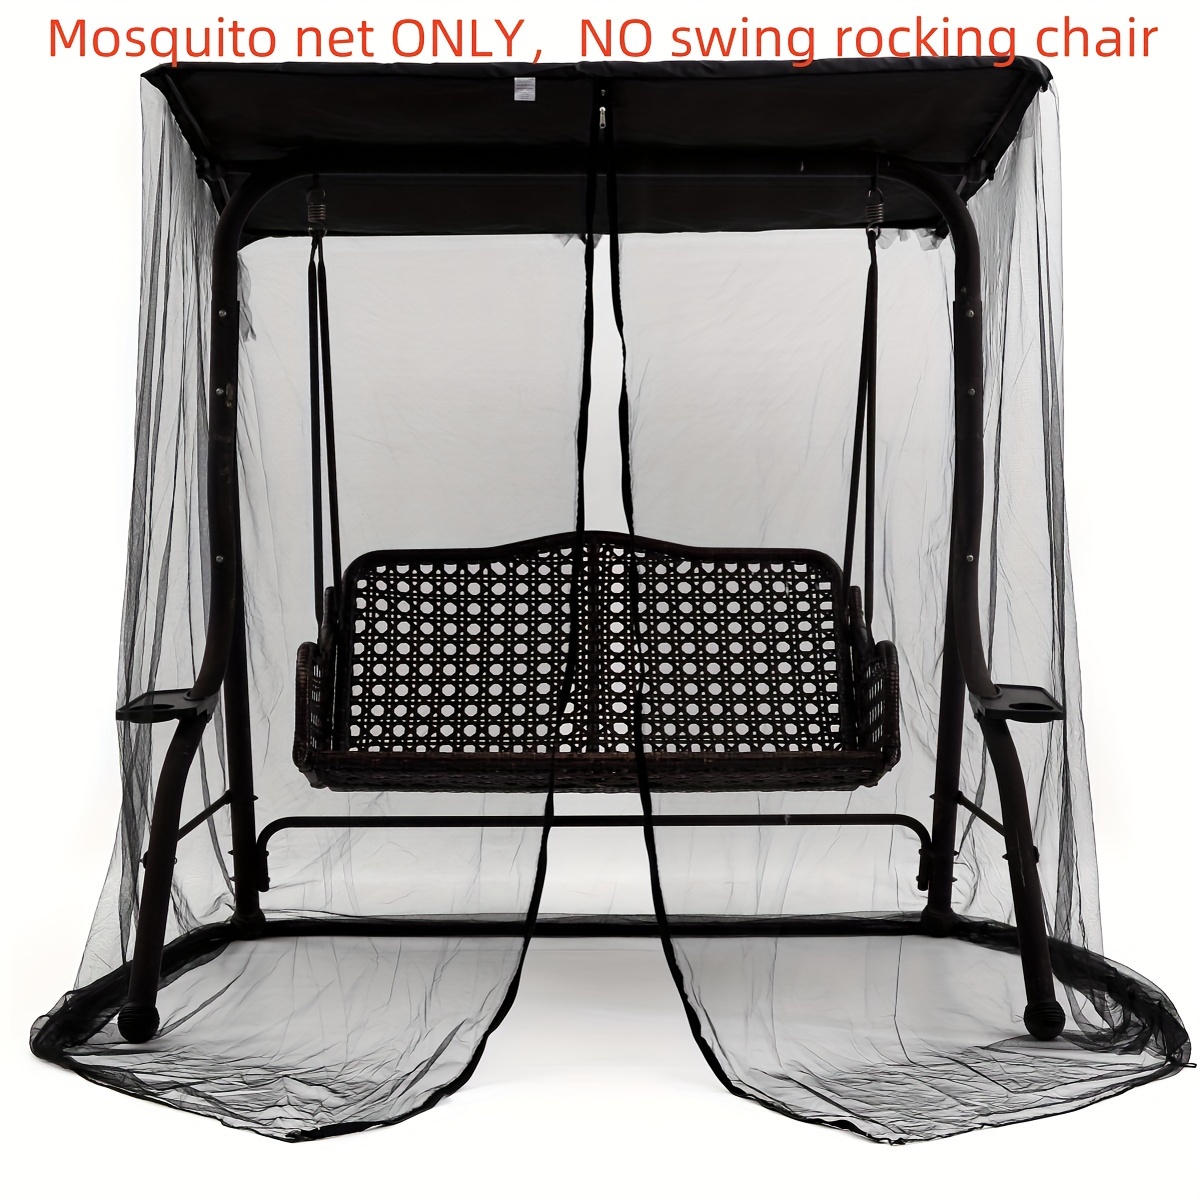 

1pc Patio Swing Chair Cover Mosquito Net, Anti-mosquito Net For Outdoor Swing Rocking Chair Protection, Iron Shaker Sunscreen Waterproof Anti-mosquito Cover For Balcony Garden, 47 To 78in